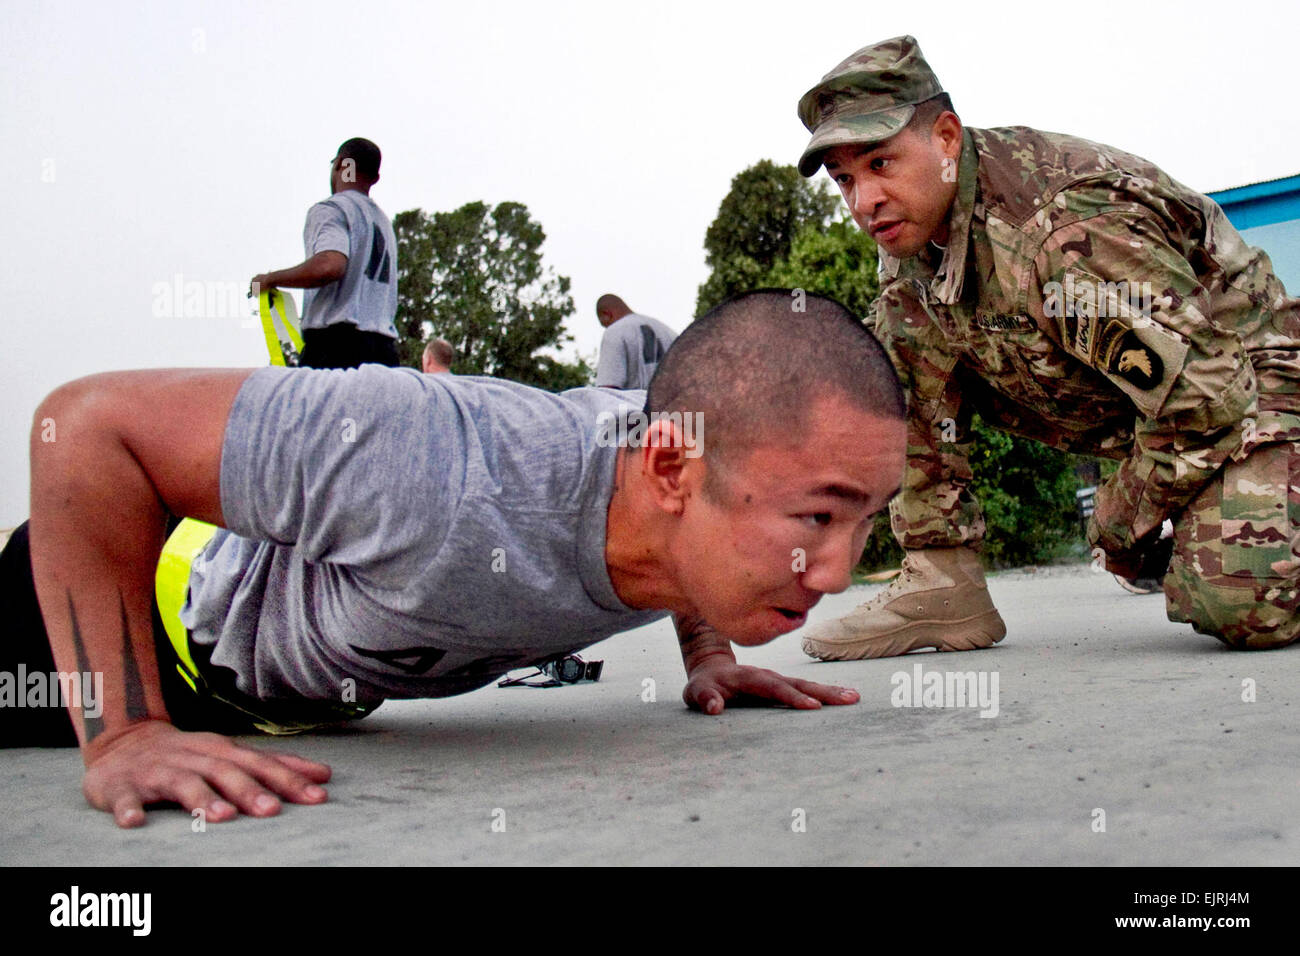 U.S. Army Sgt. 1st Class Jessie H. Sanchez with the 4th Brigade Combat Team “Currahee”, 101st Airborne Division Air Assault, observes a Soldier doing pushups, during an Army Physical Fitness Test for Currahees competing in Soldier/Non-commissioned Officer of the Quarter as well as the Sgt. Audie Murphy board at forward operating base Salerno, Afghanistan, July 14, 2013.  Sgt. Justin A. Moeller, 4th Brigade Combat Team Public Affairs Stock Photo